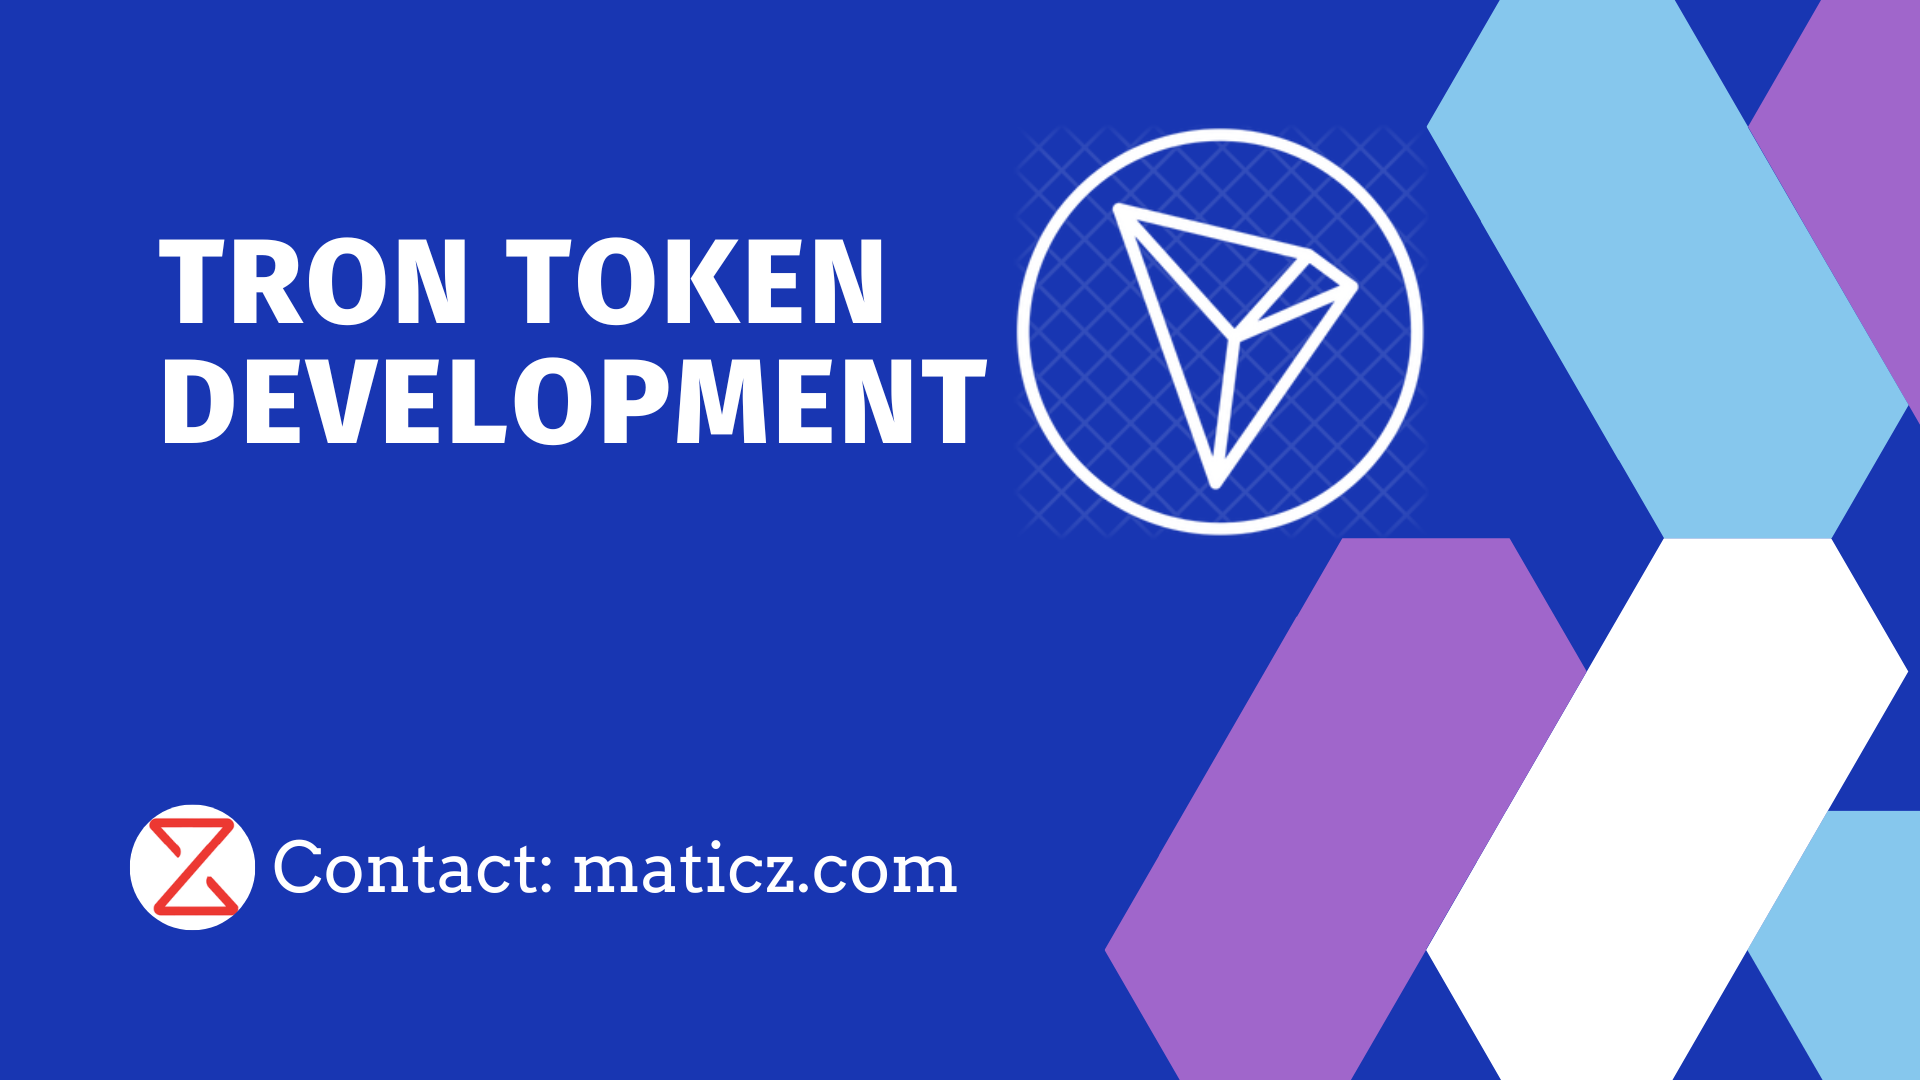 Article about Create your own Tron Token Development